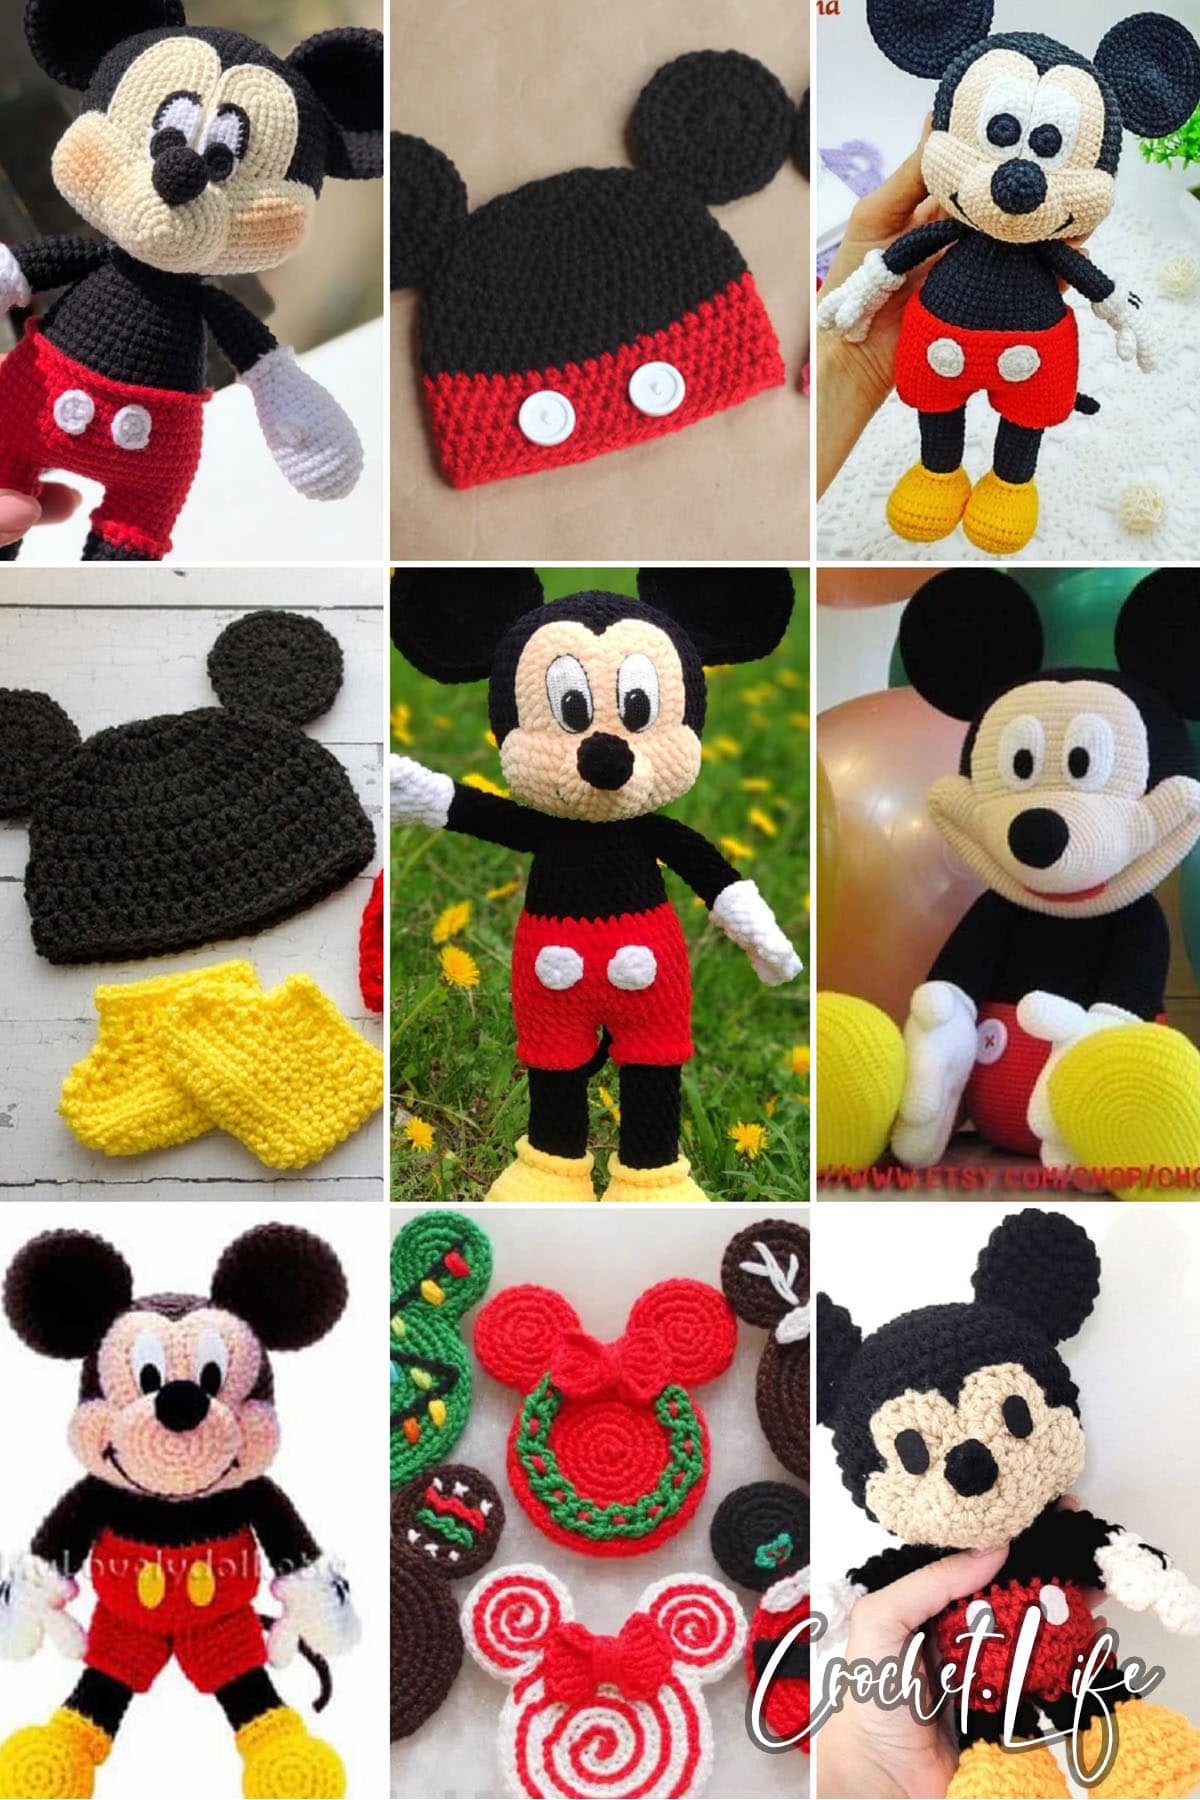 13 Magical Mickey Mouse Crochet Patterns - Crochet Life